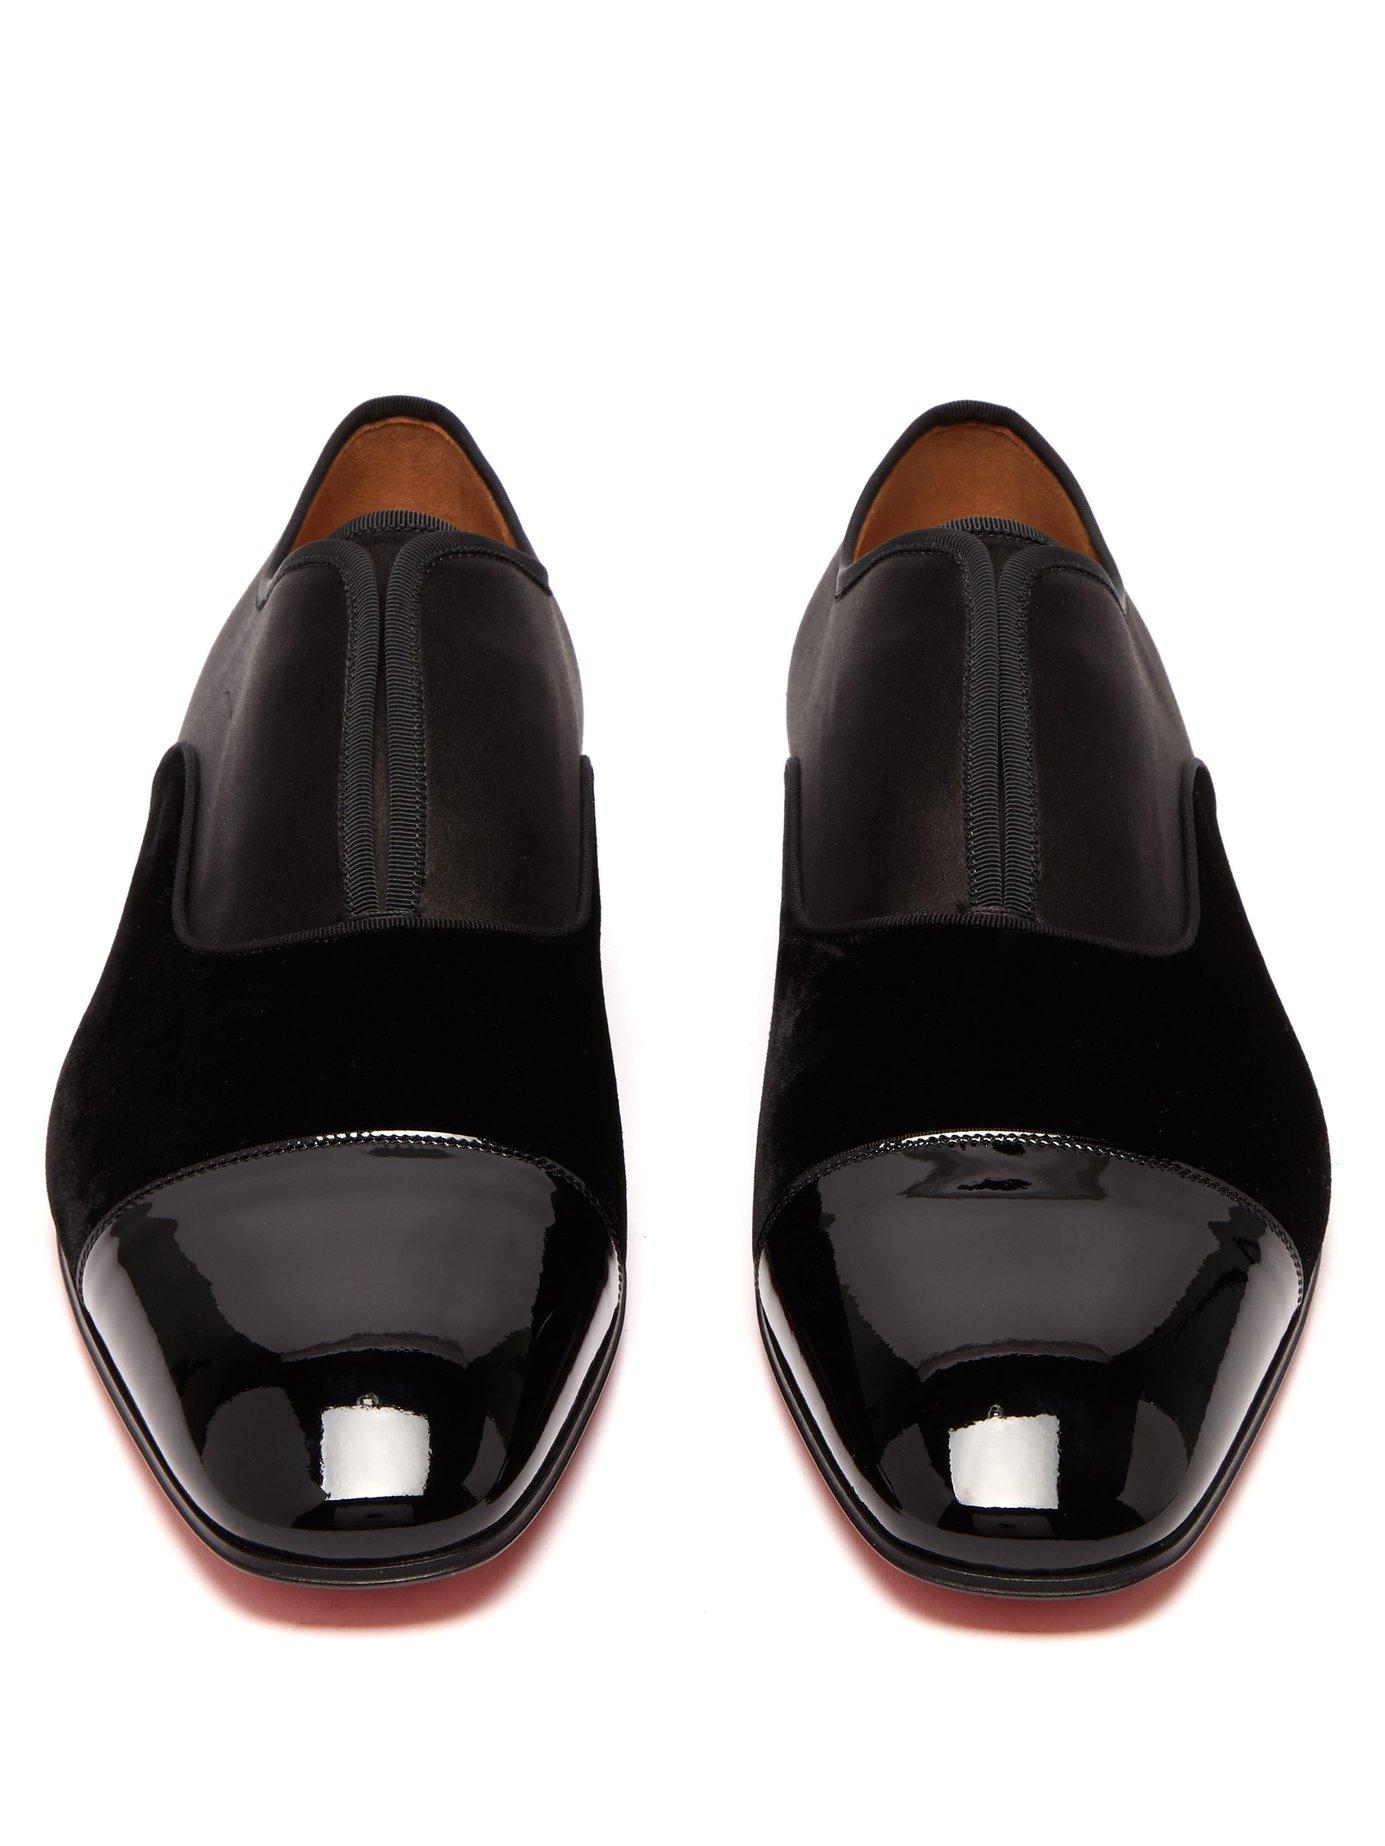 Christian Louboutin Alpha Male And Patent Leather Dress Shoes in Black Men | Lyst